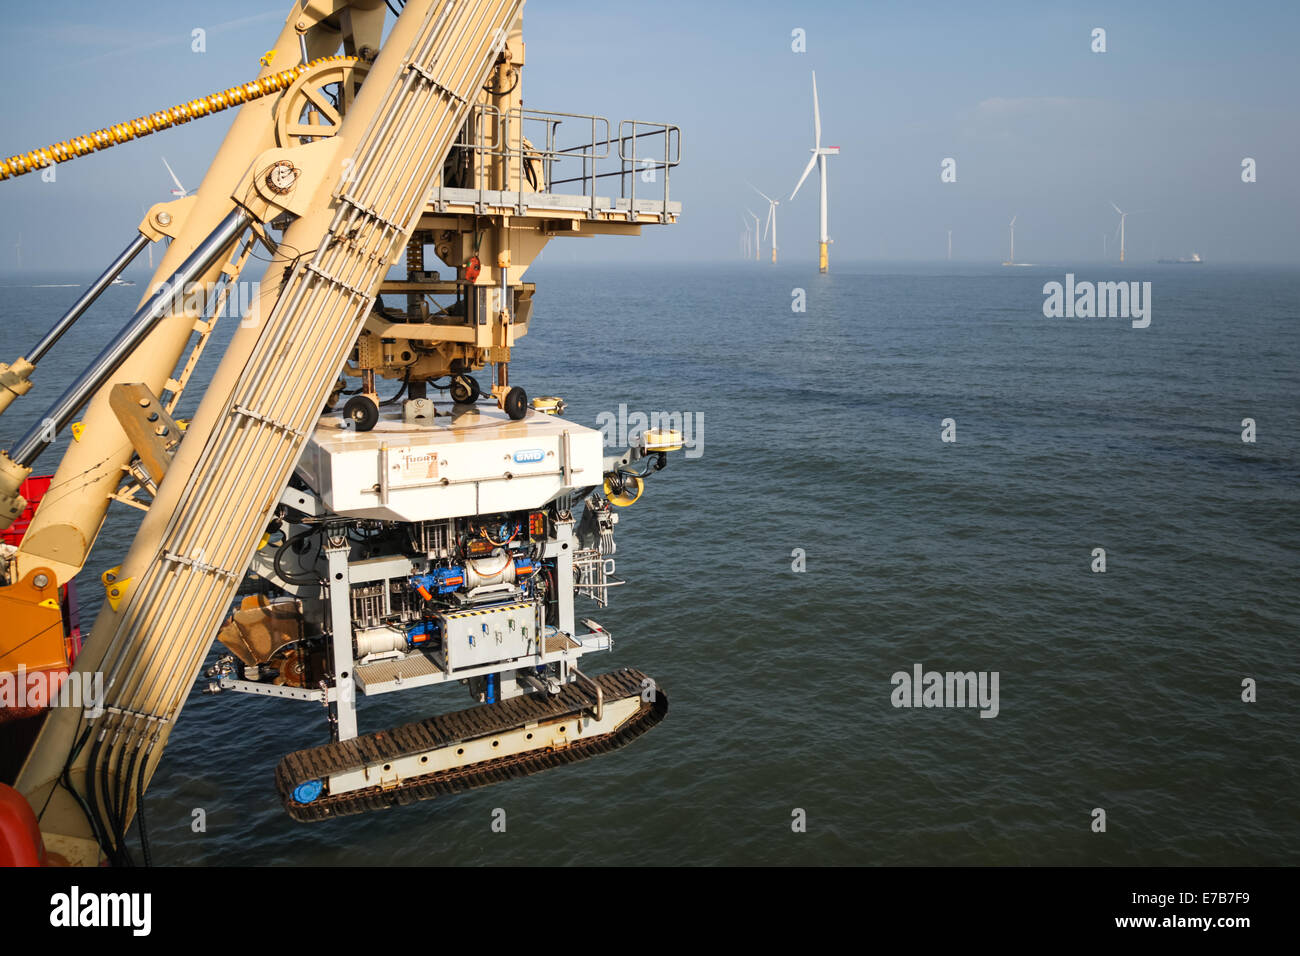 An SMD Remotely Operated Vehicle (ROV) cable trenching crawler working offshore on the Gwynt y Mor Offshore Wind Farm Stock Photo